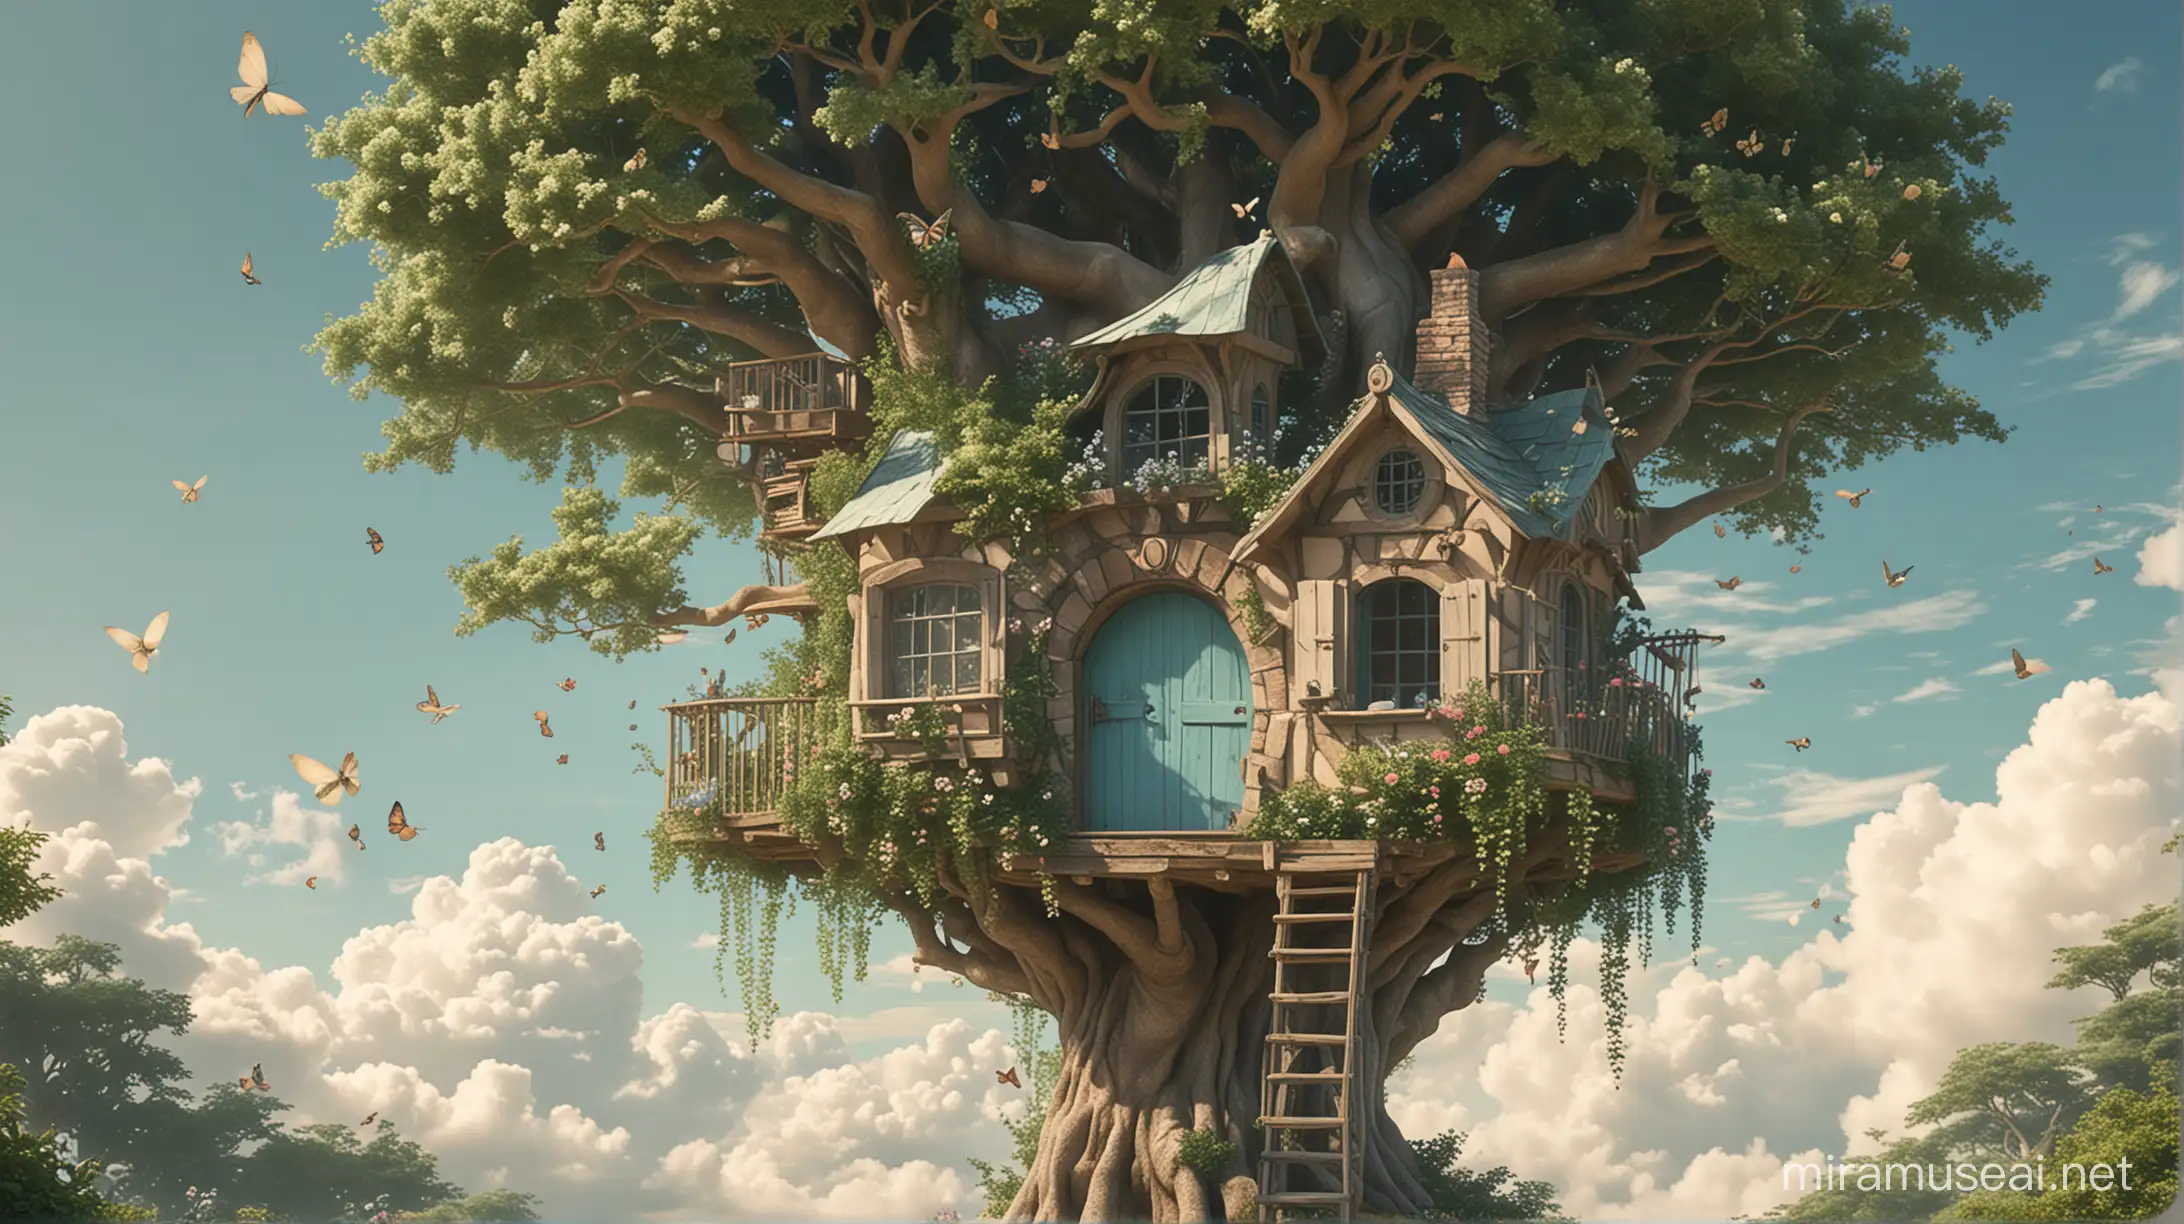 Sky Treehouse with Fluffy Clouds and Whimsical Wildlife